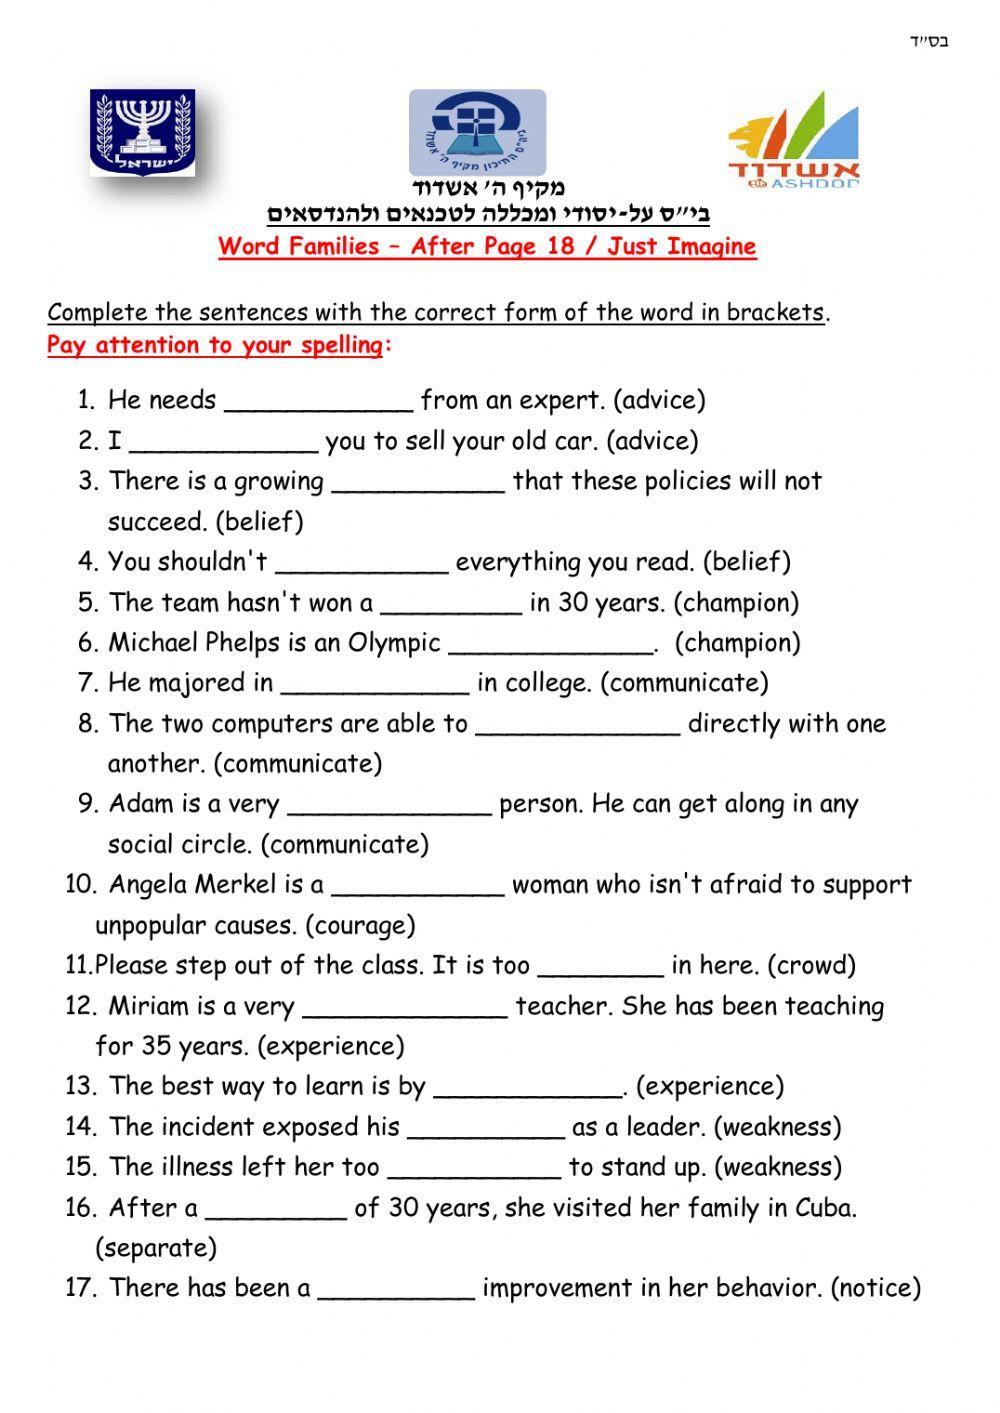 Word Families - Just Imagine - After page 18